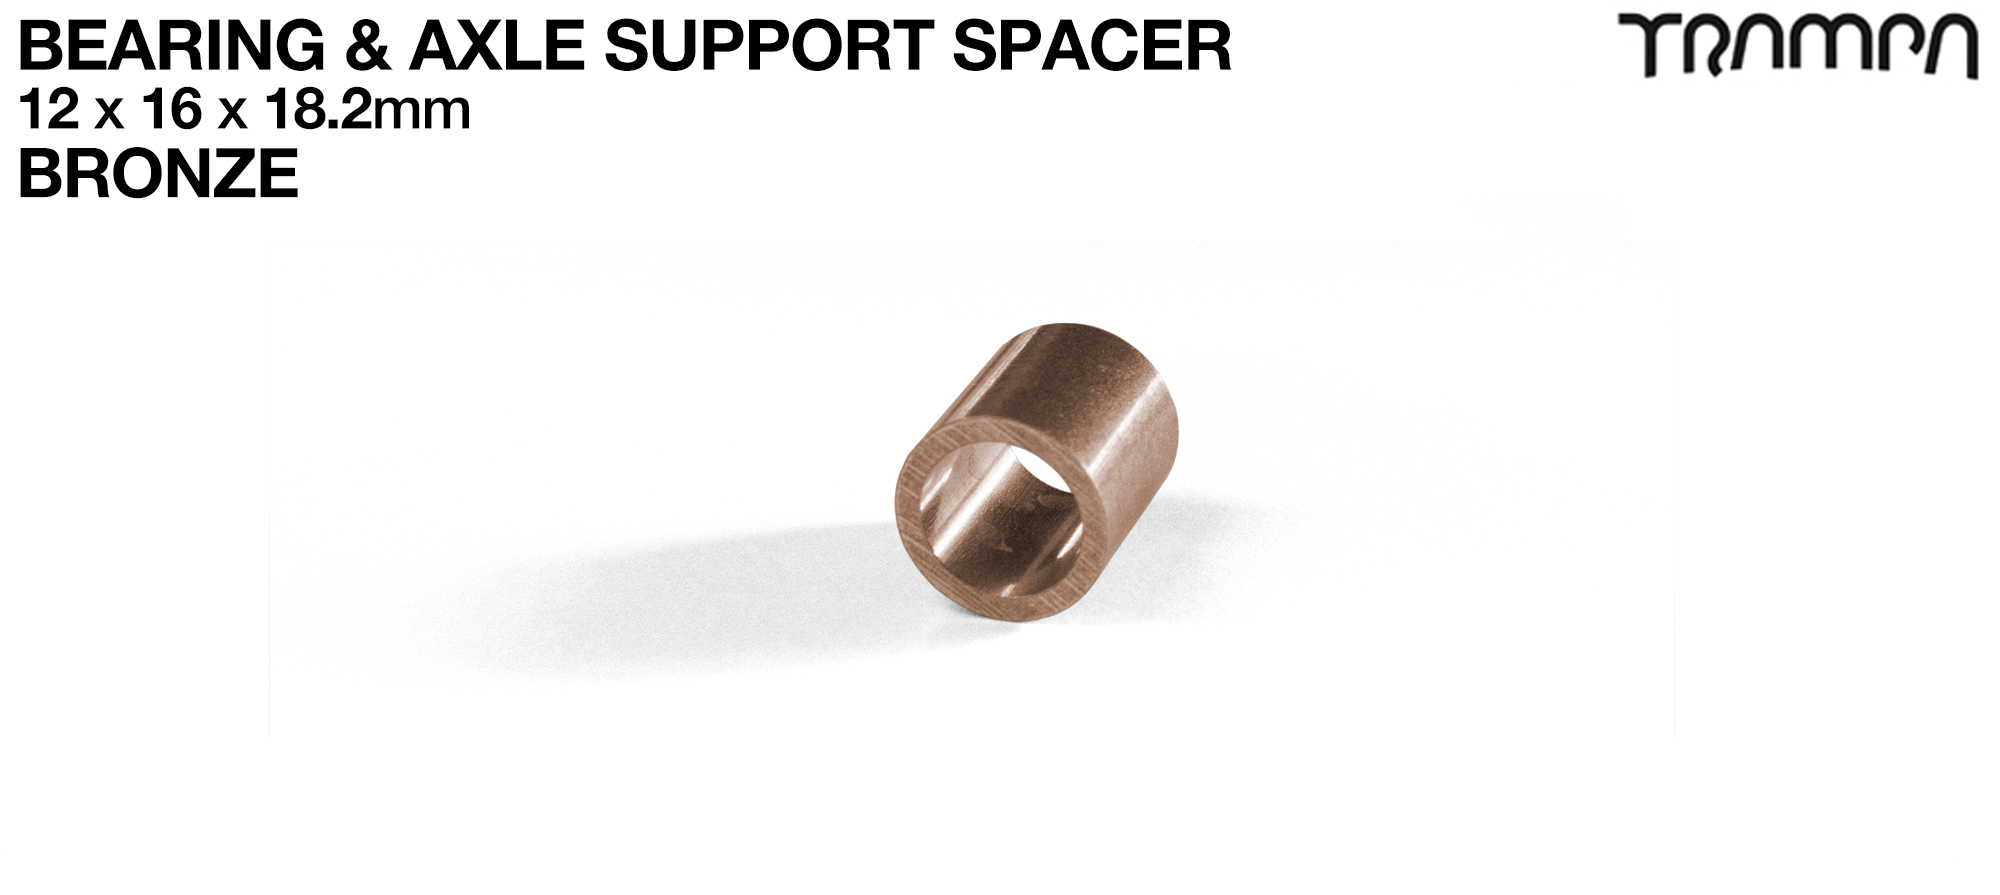 Wheel support spacer for all TRAMPA Wheels on 12mm ATB Axles - CNC precision 12mm x 16mm x 18.2mm  - BRONZE